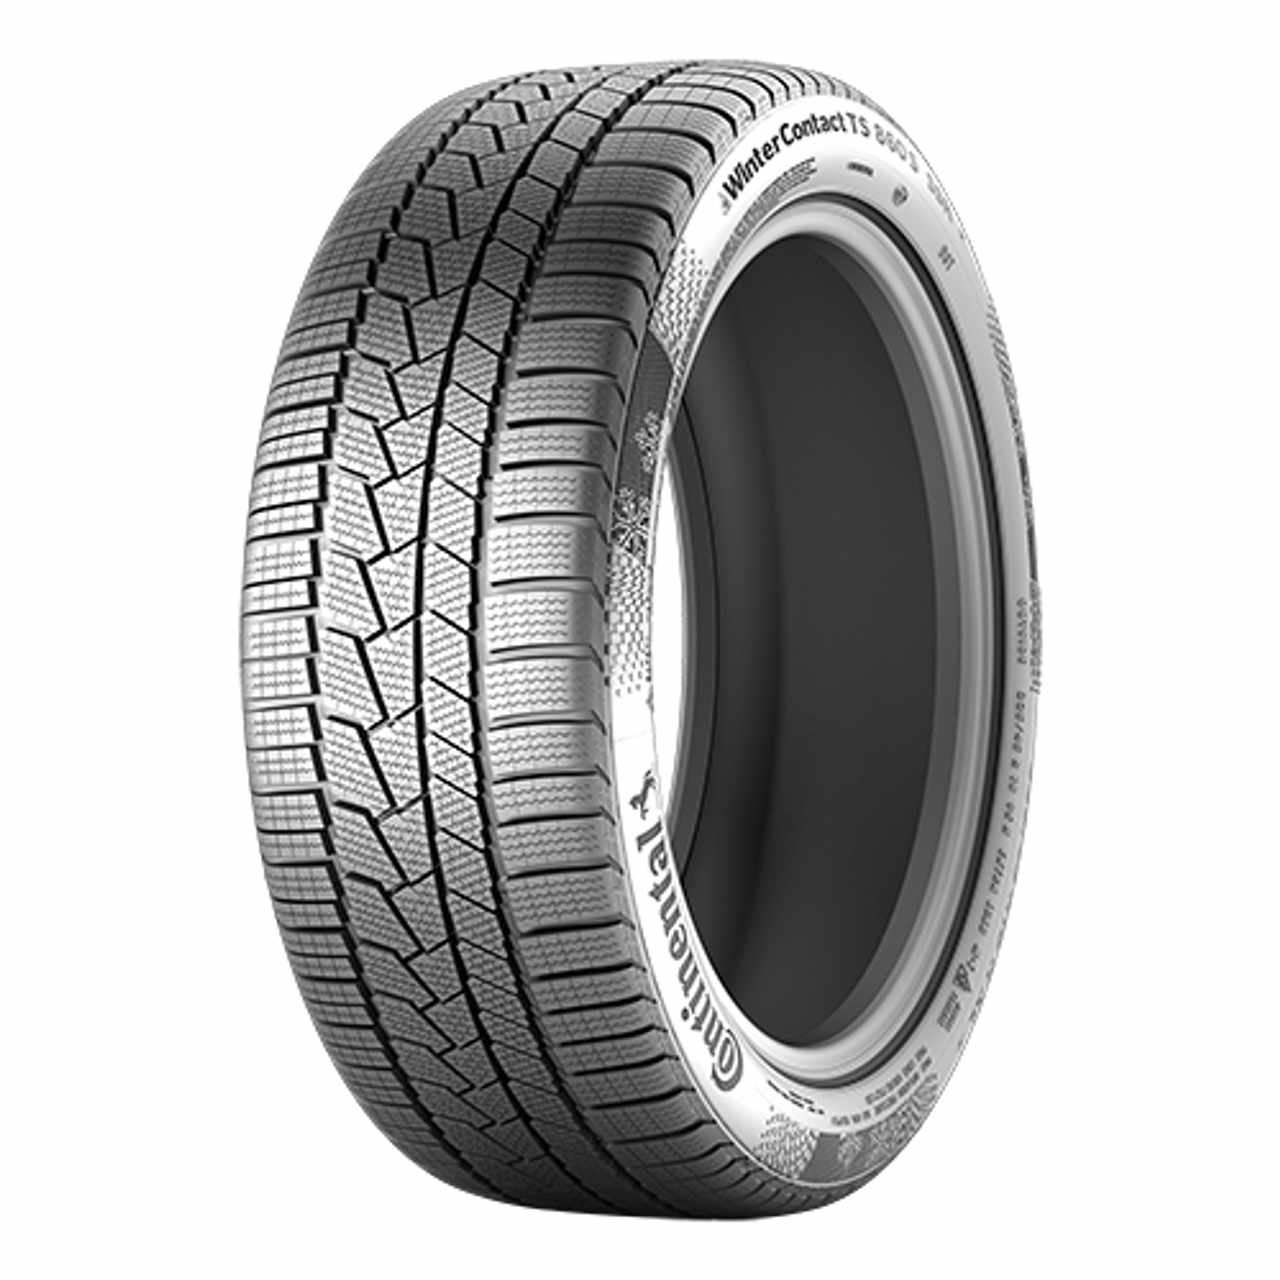 CONTINENTAL WINTERCONTACT TS 860 S (*) (EVc) 195/55R16 91H BSW XL